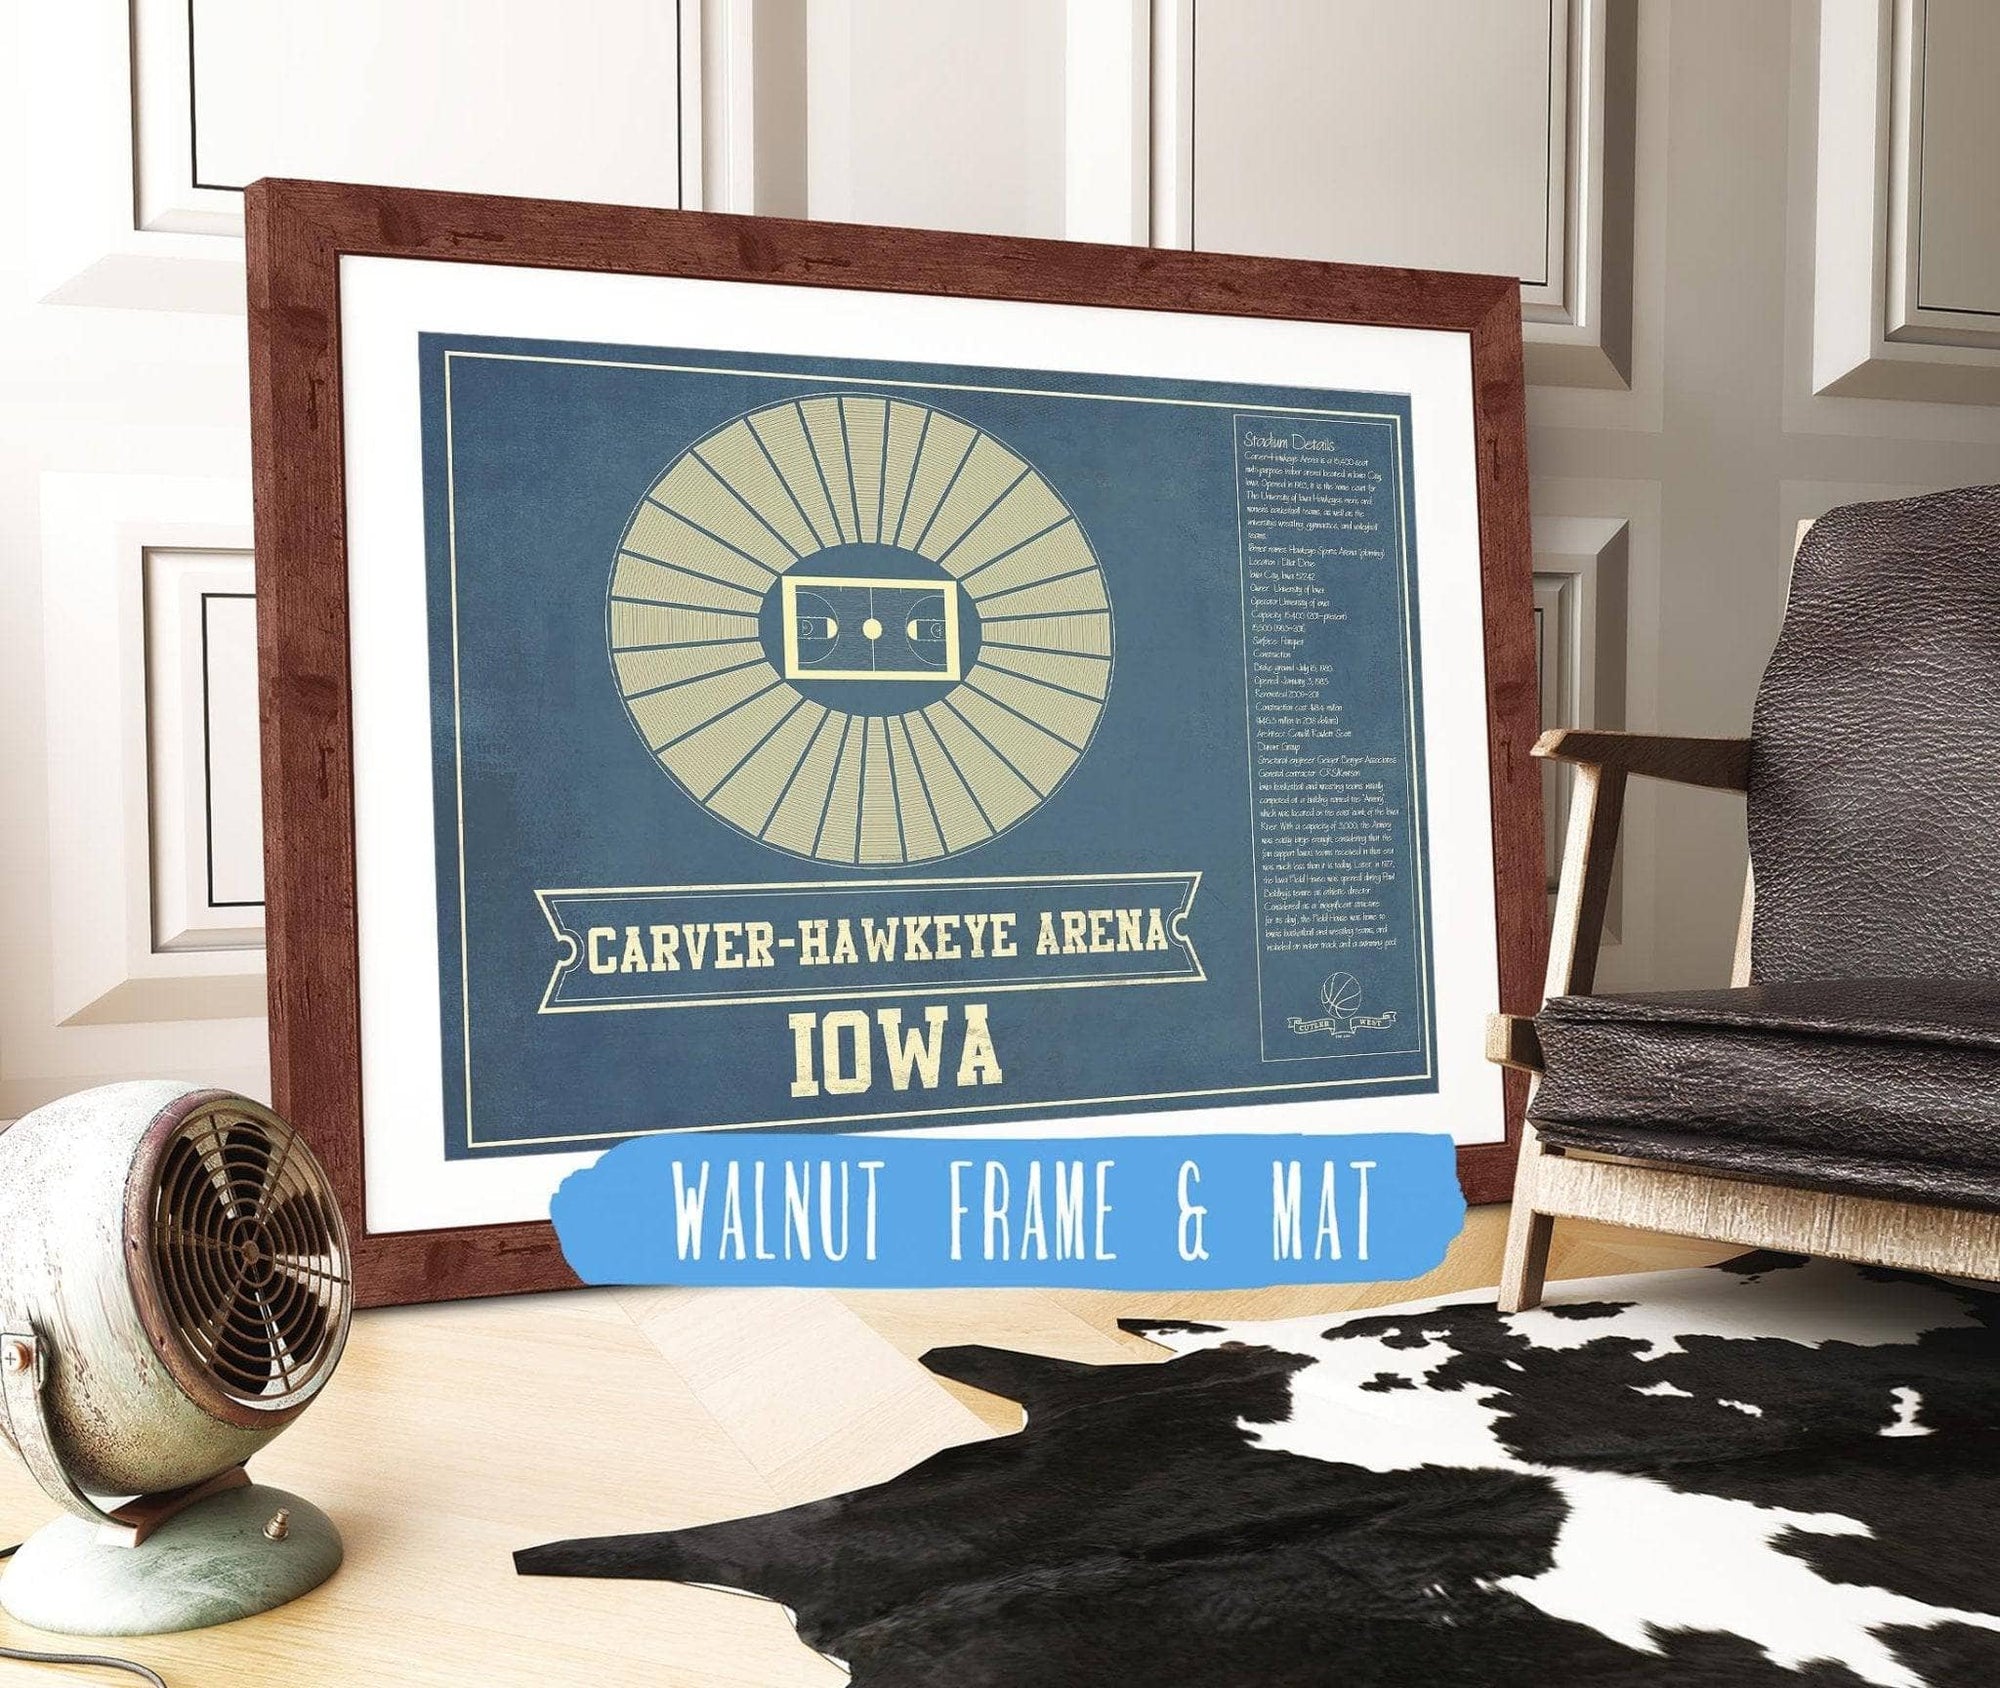 Cutler West Basketball Collection 14" x 11" / Walnut Frame & Mat Carver–Hawkeye Arena Iowa Men's And Women's Basketball Vintage Print 933350233_83430